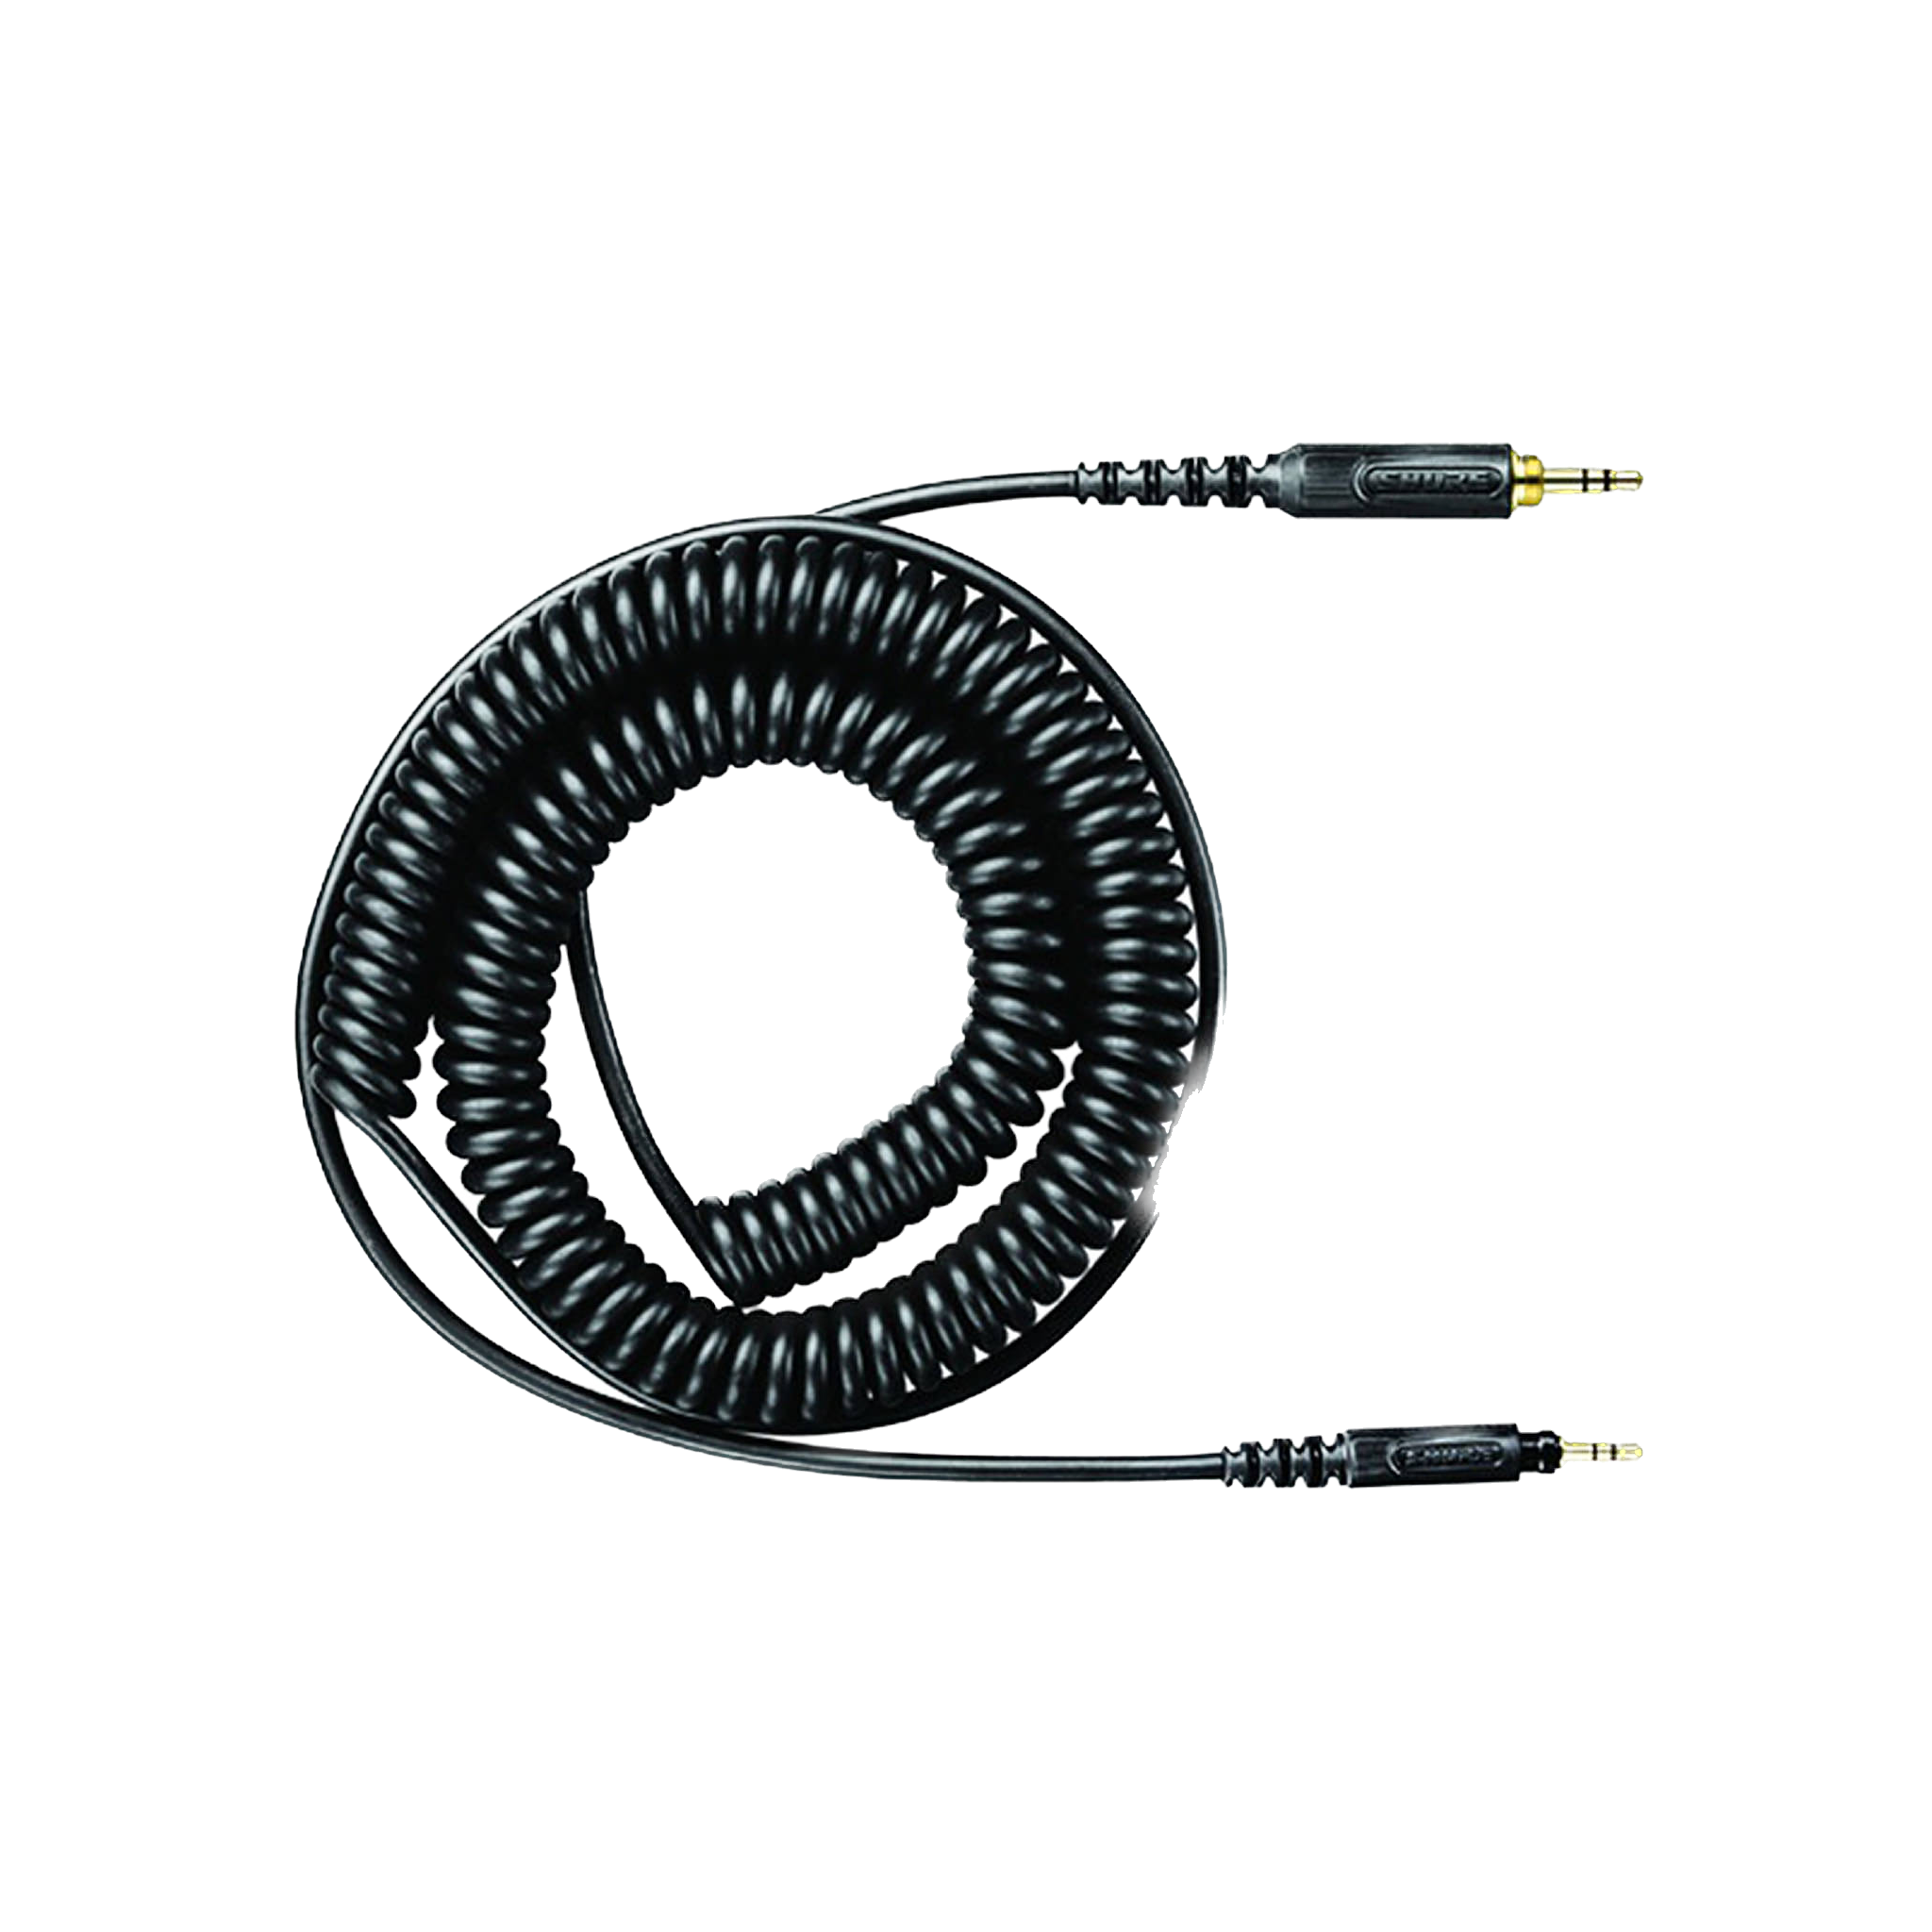 Replacement Cable for Shure Headphones